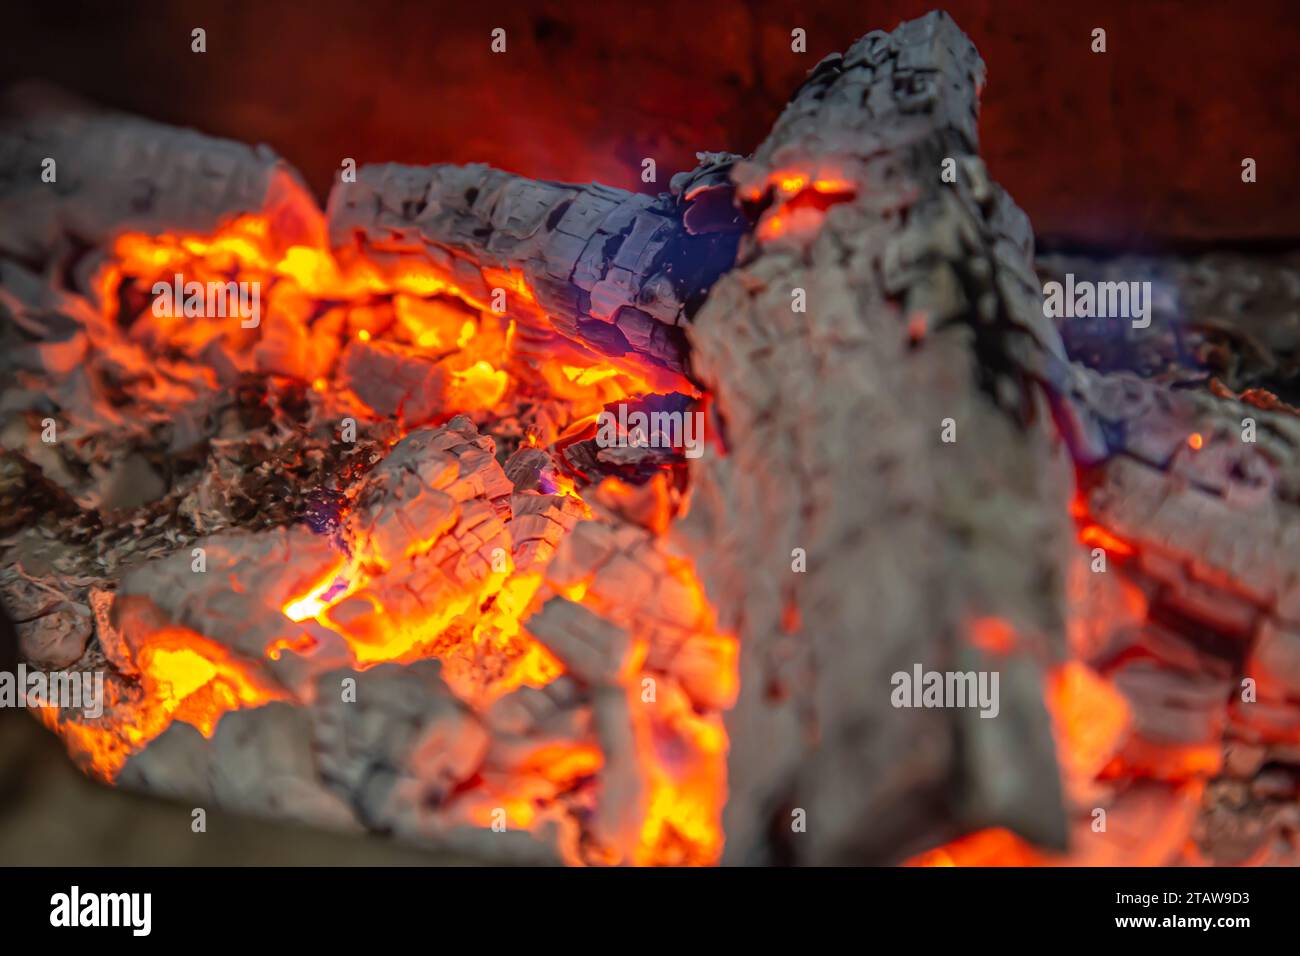 Firewood smoldering with a red flame in the fireplace Stock Photo